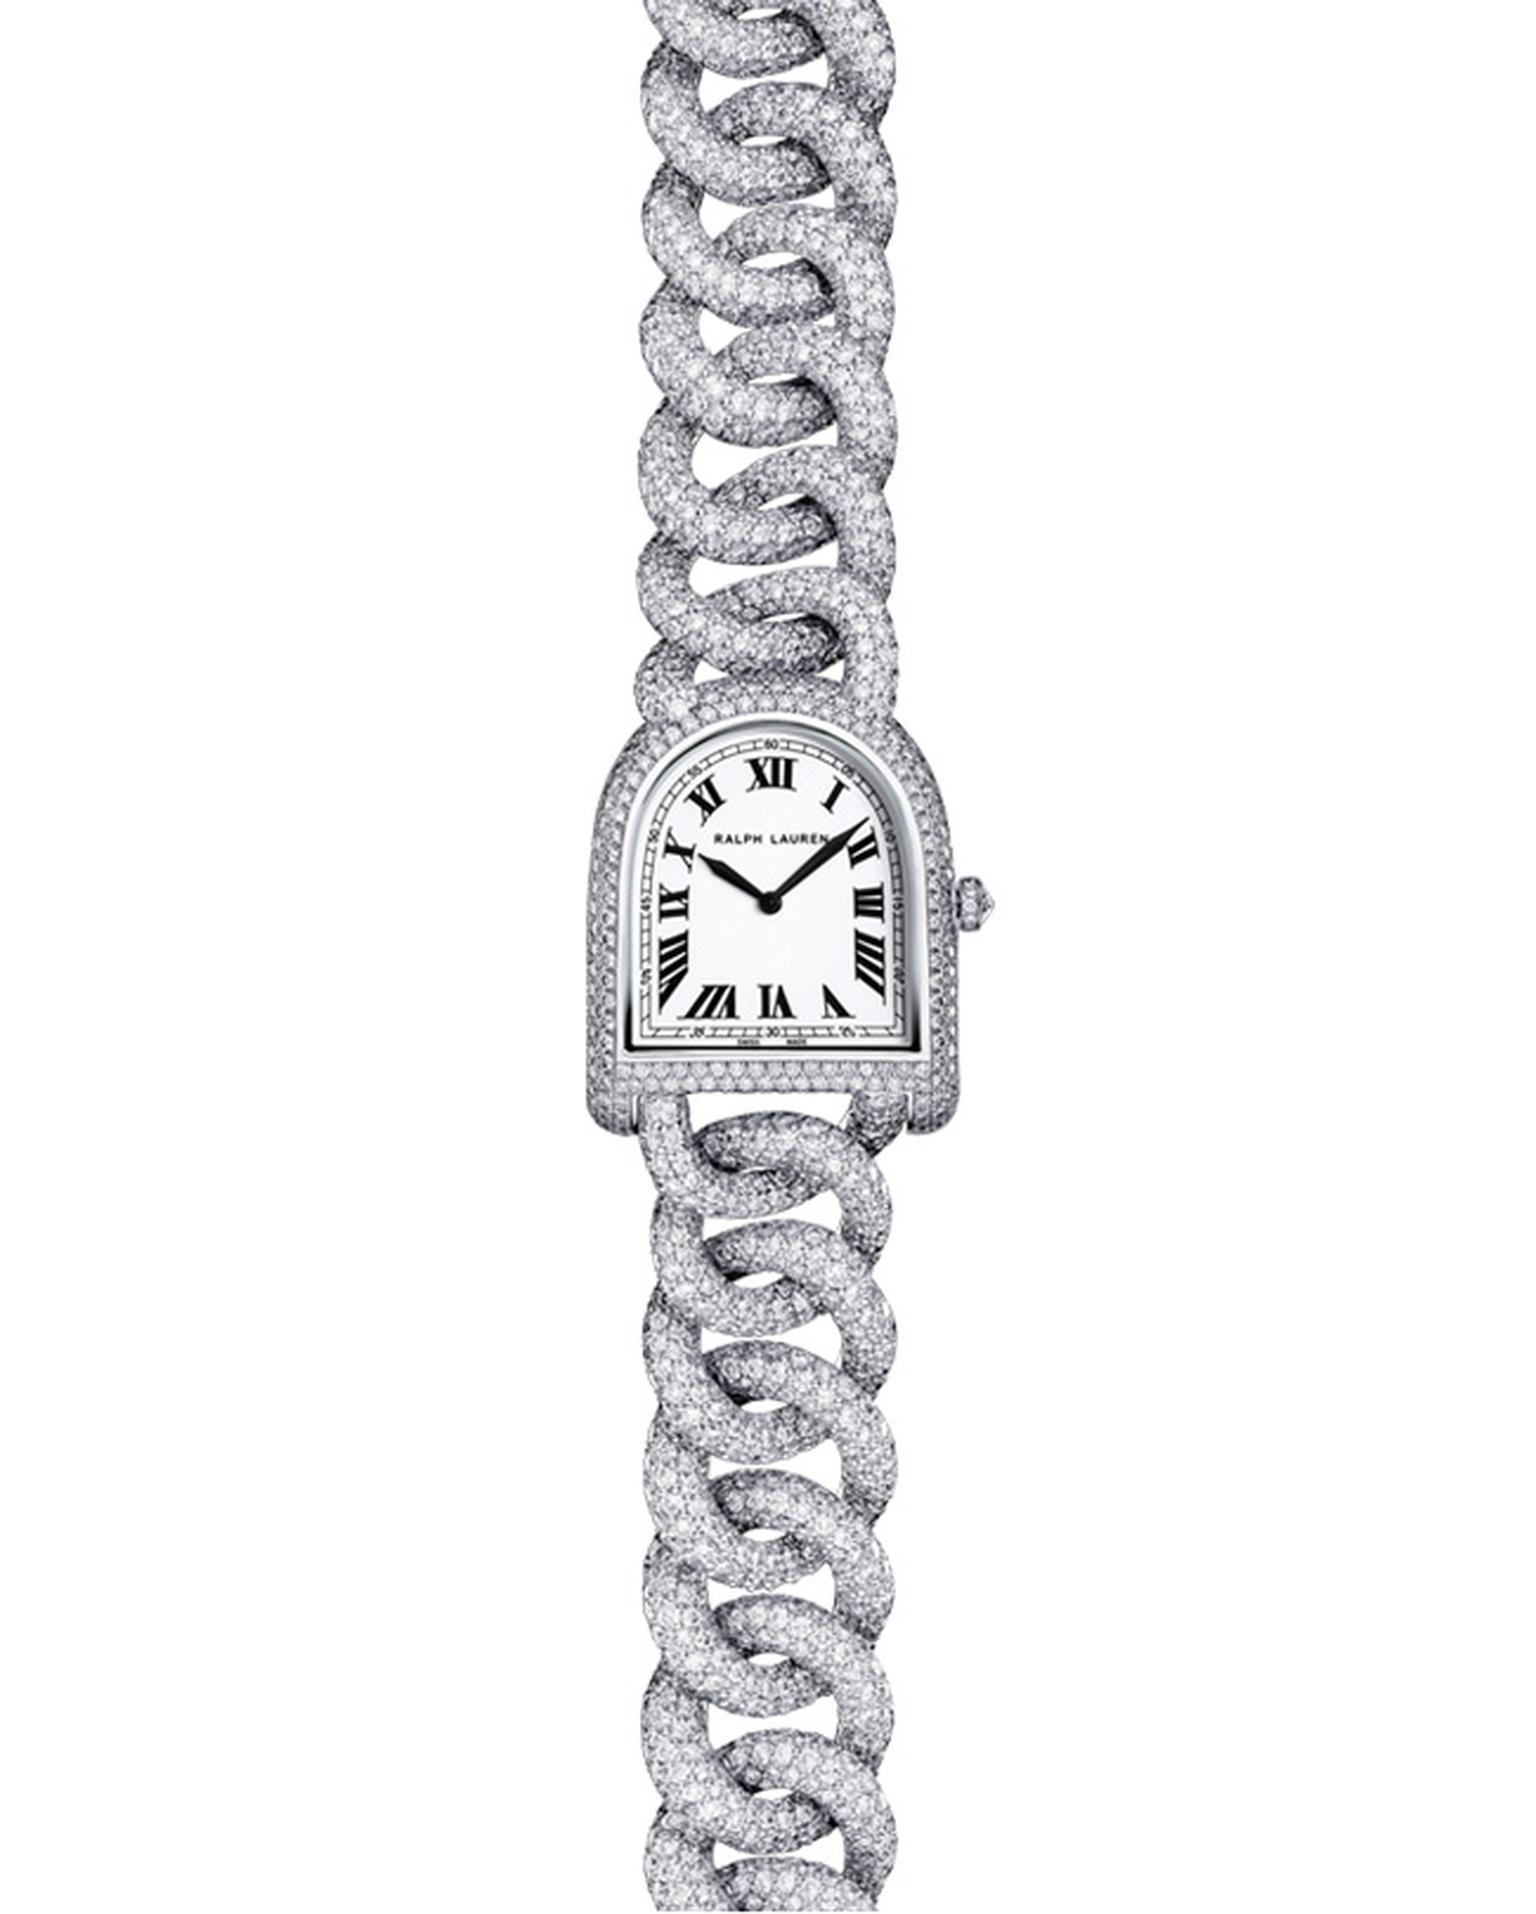 The Ralph Lauren Stirrup Petite watch offers a daintier case measuring just 23.3mm by 27mm and an intertwining link bracelet that wraps elegantly around the wrist. The most opulent model is this Petite Stirrup Link watch in white gold and diamonds. This s